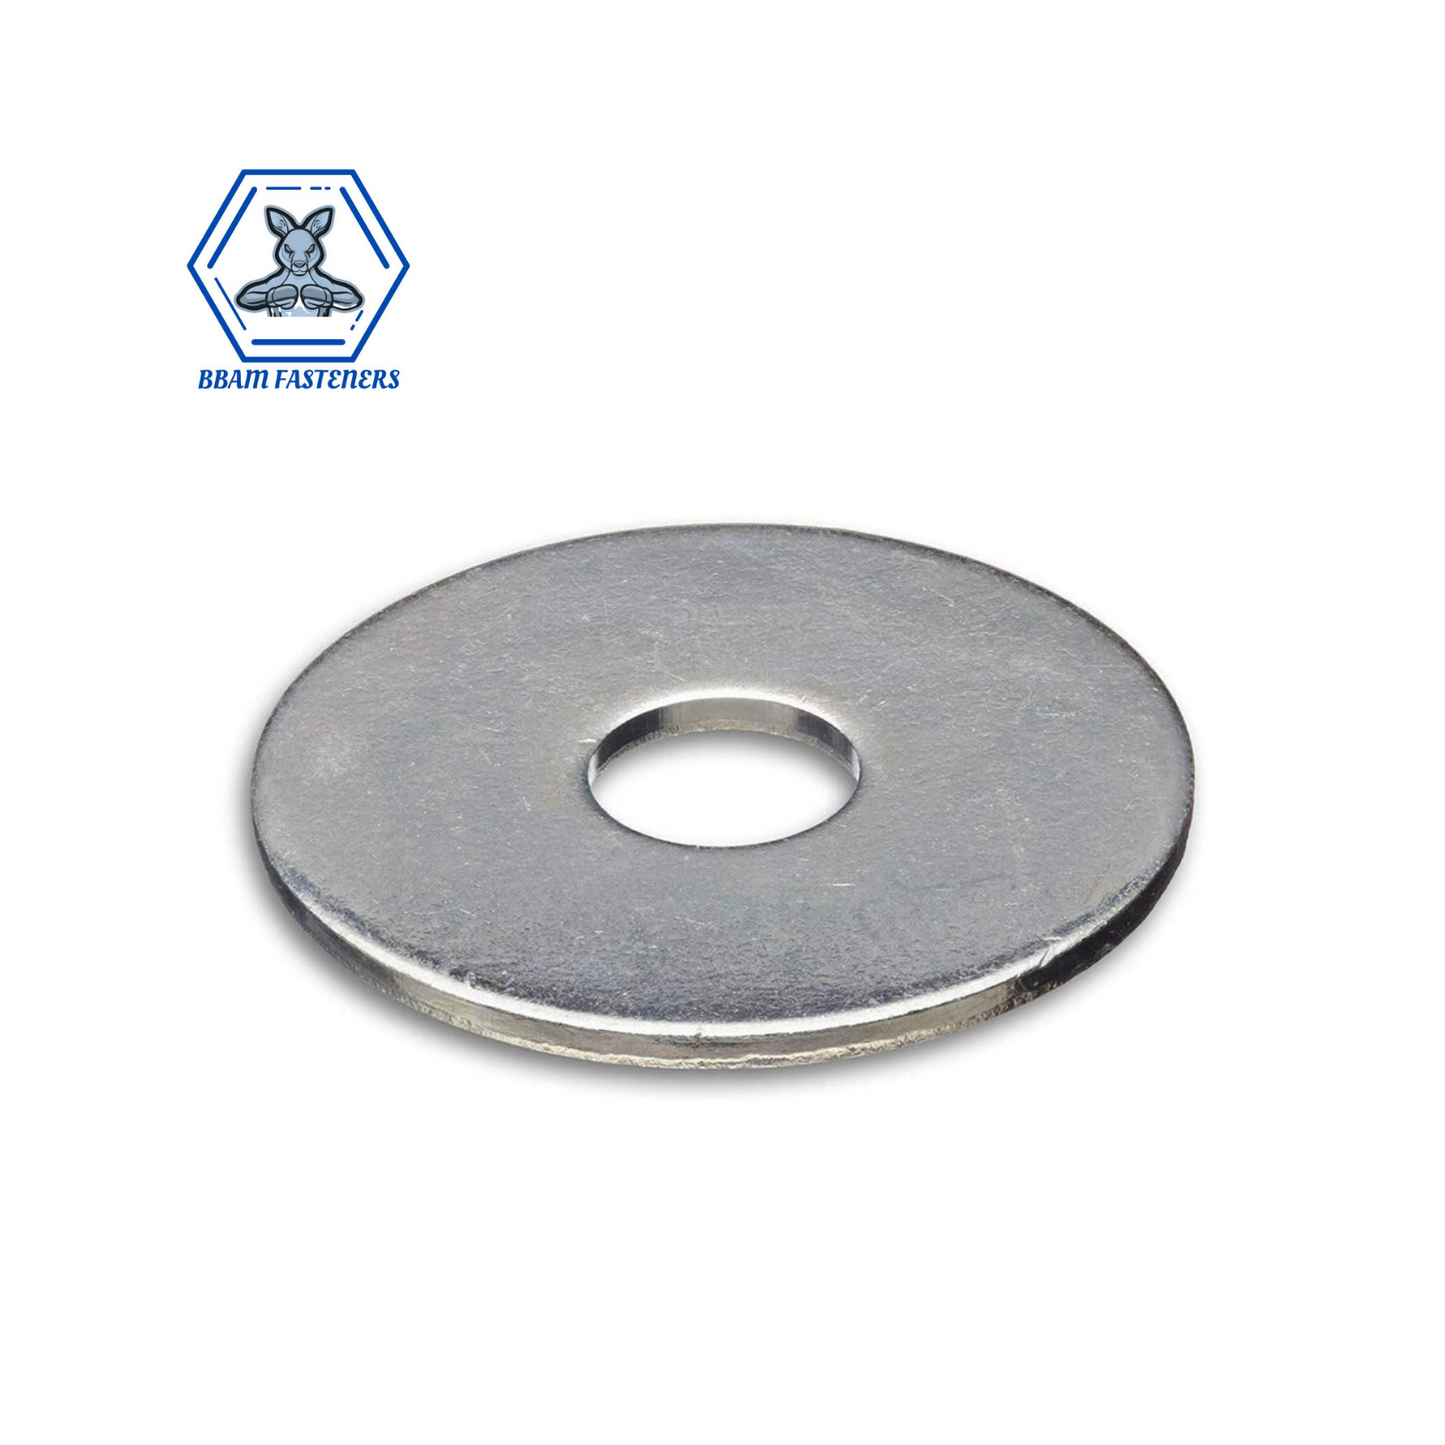 M4 x 12mm x 1.0mm Large Washer 304 Stainless Steel